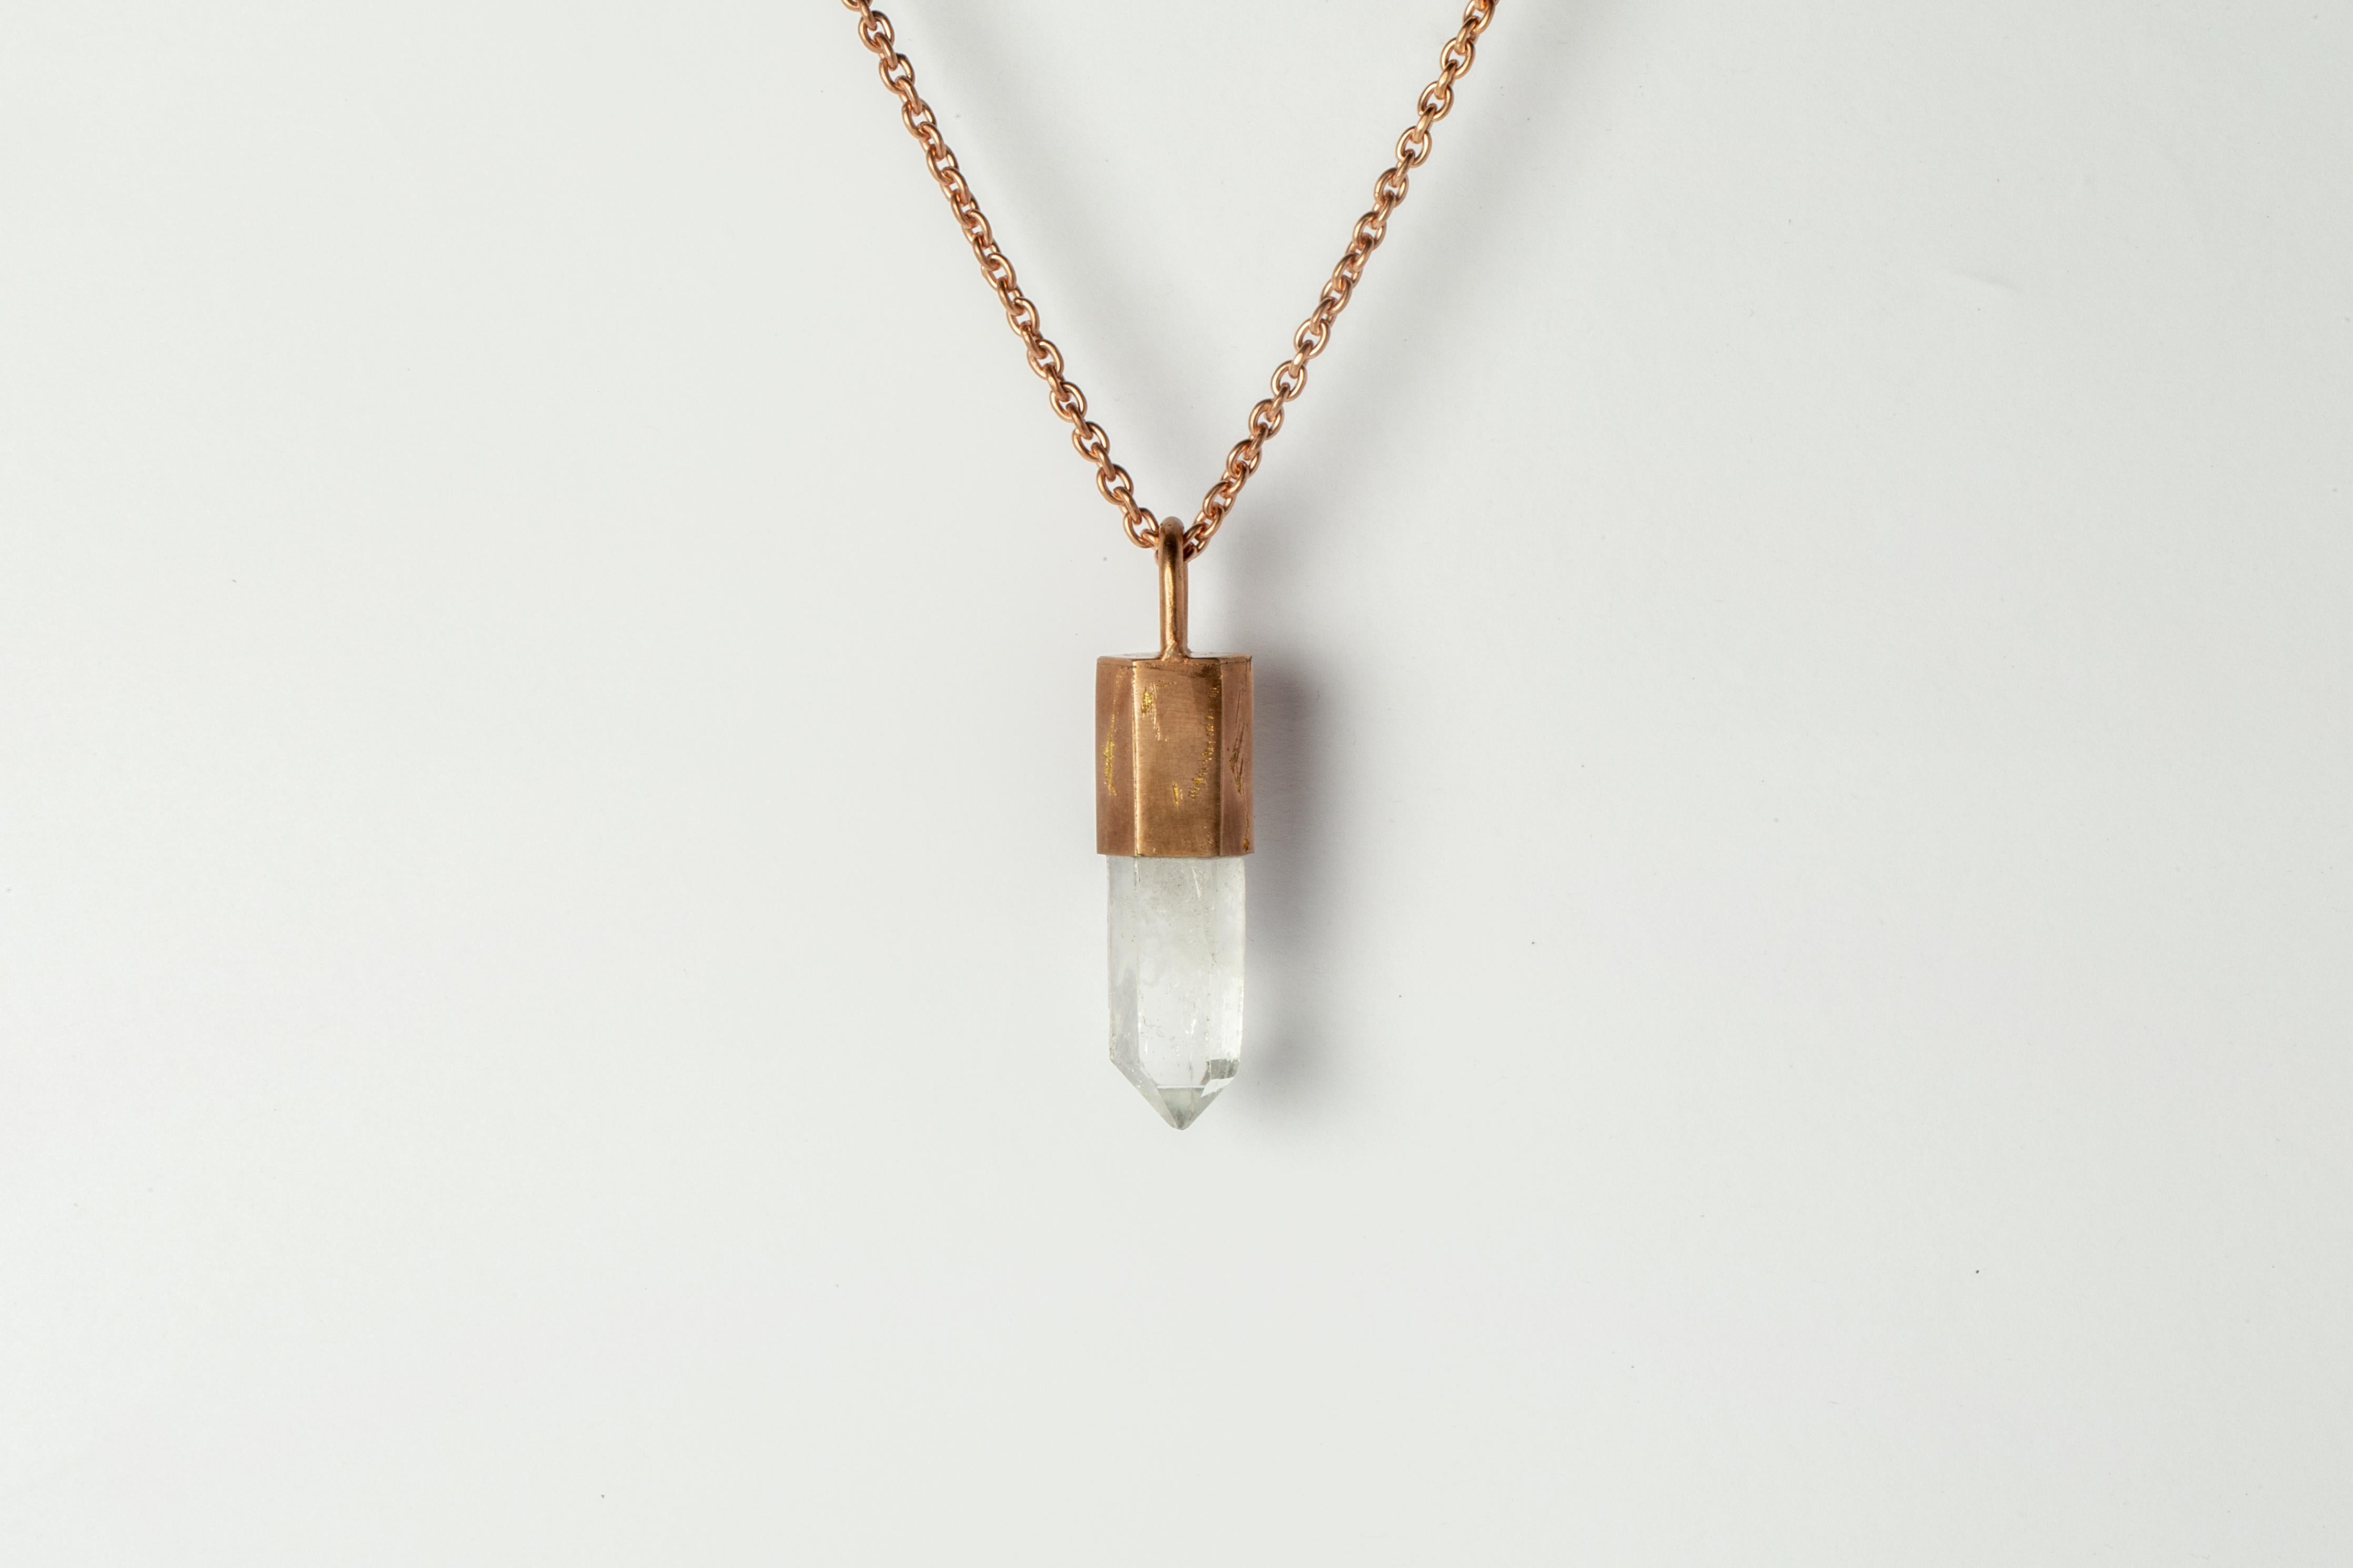 Pendant necklace in brass, sterling silver, and a rough of misc quartz. Brass and sterling silver substrates are electroplated with 18k rose gold and then dipped into acid to create the subtly destroyed surface.
The Talisman series is an exploration